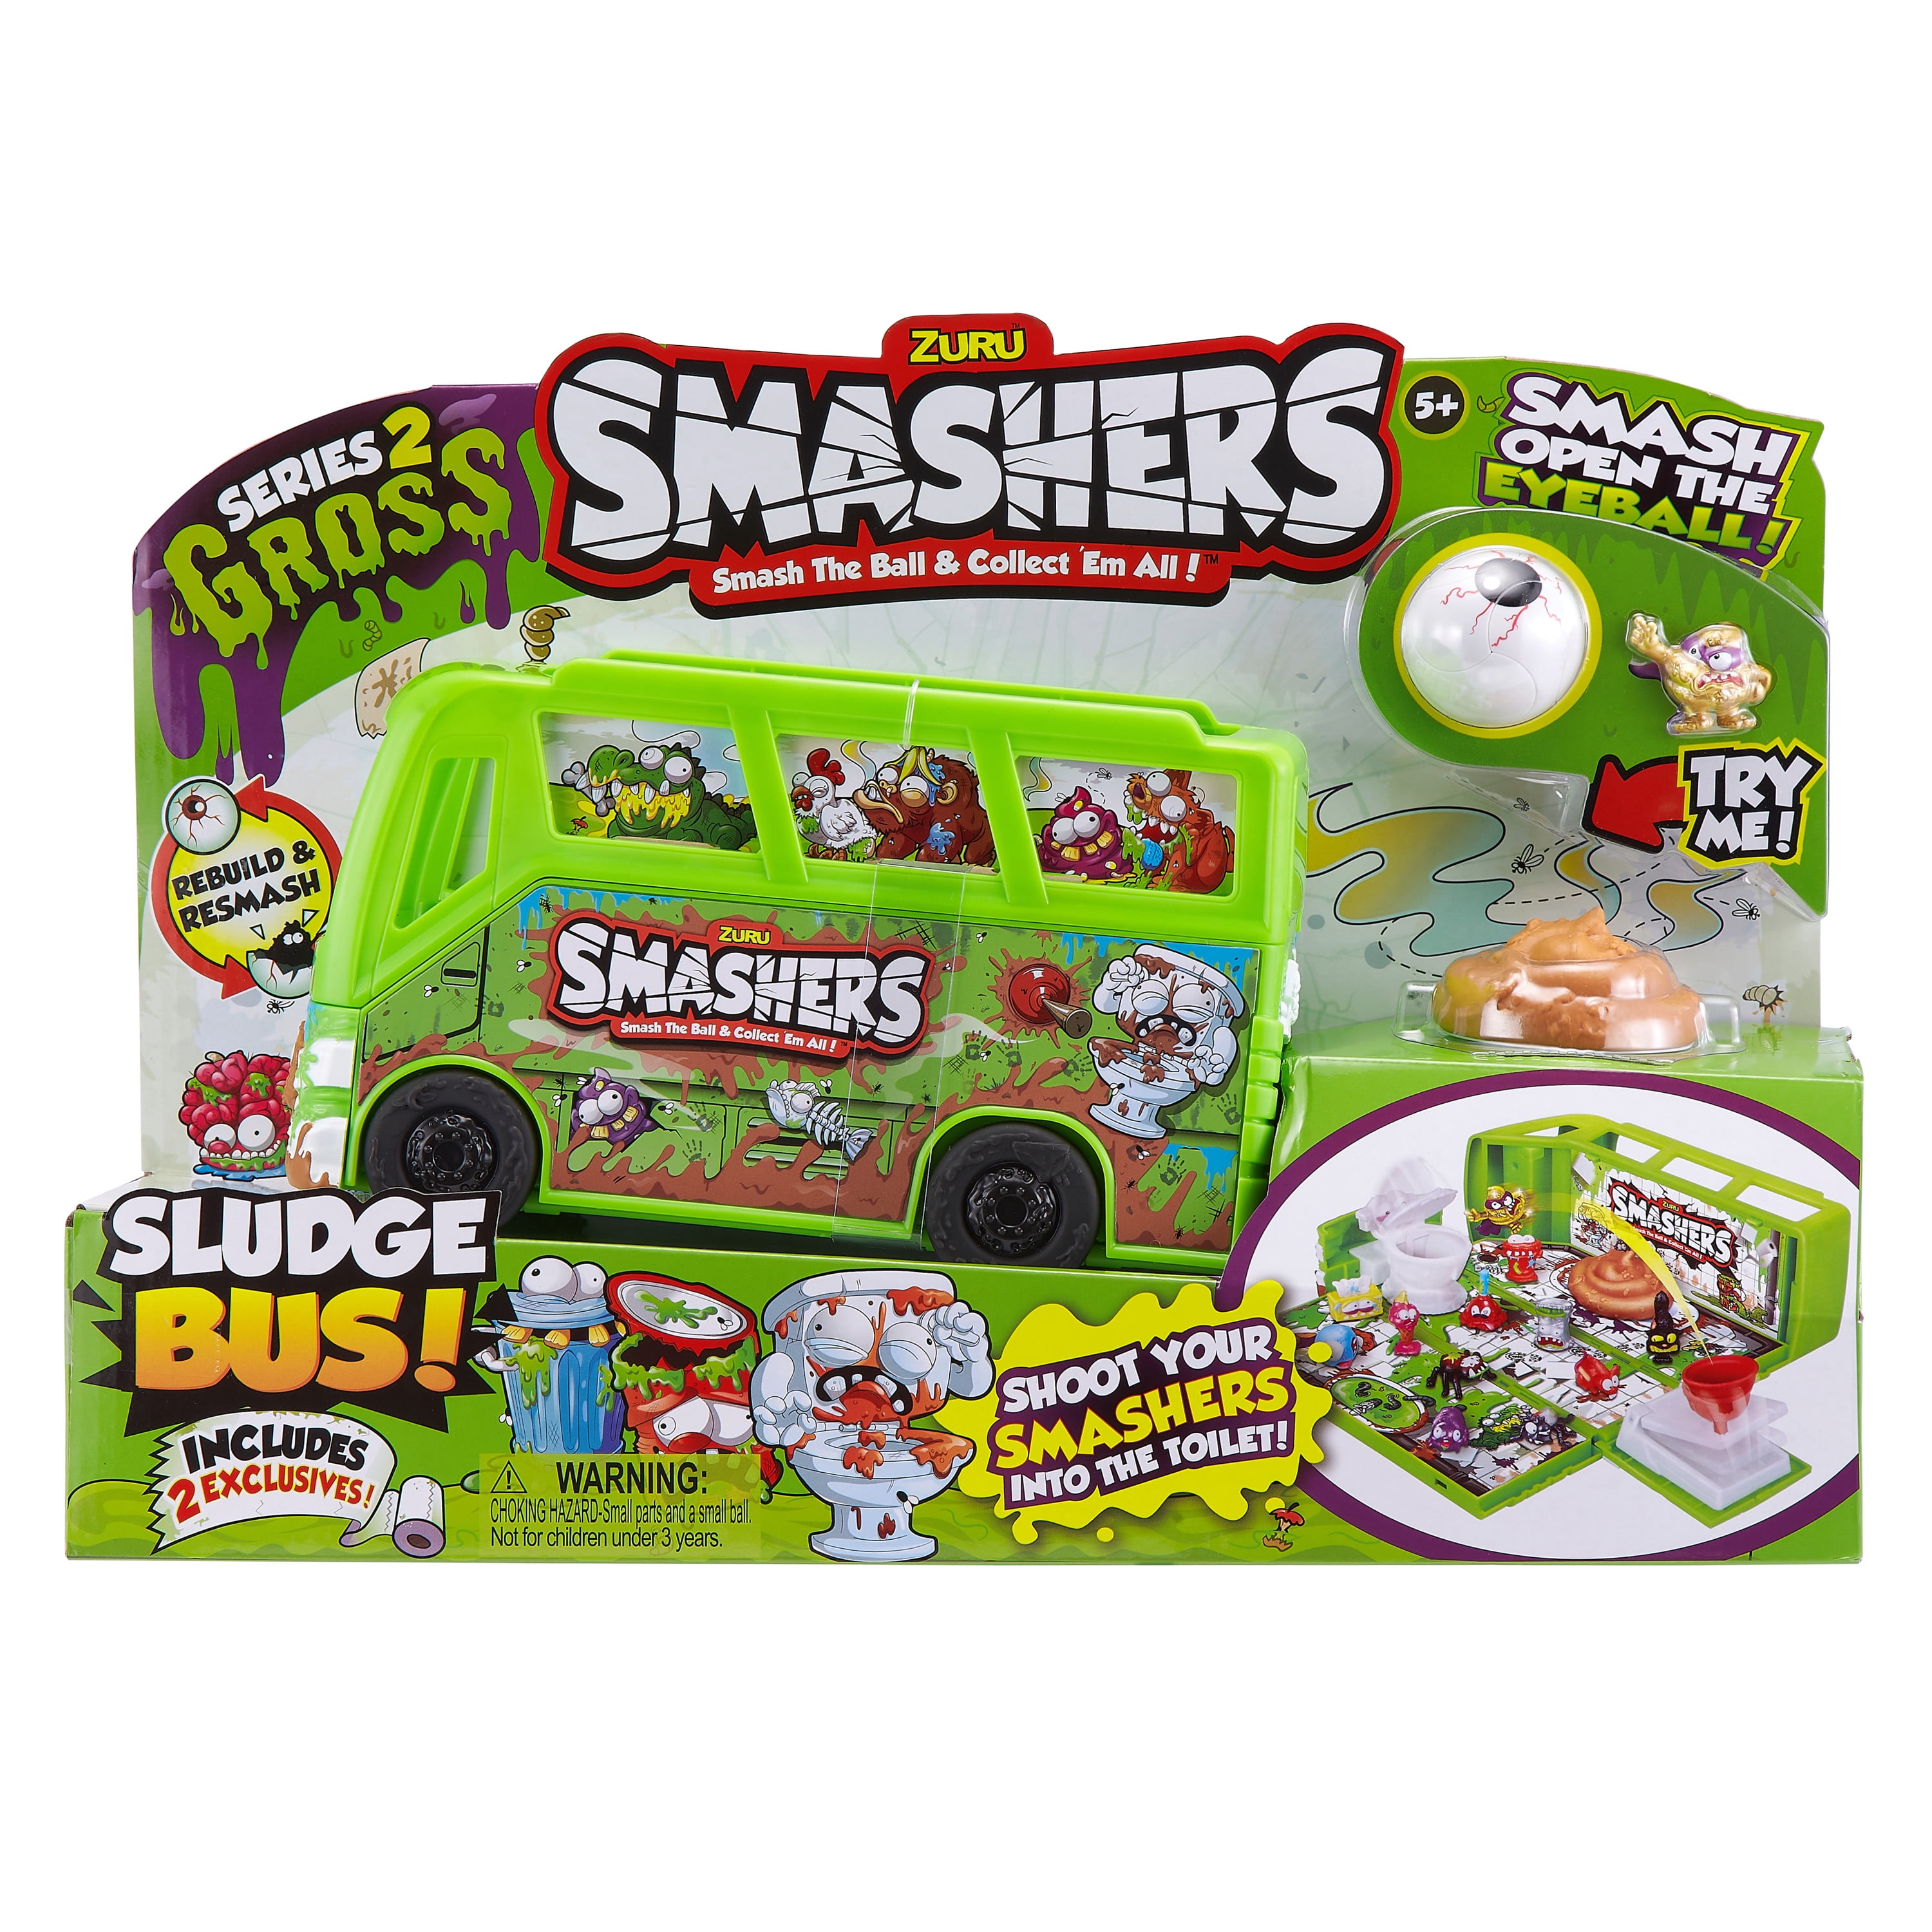 Smash Ball Gross Theme Smashers Zuru Collectibles Toy 8 pack